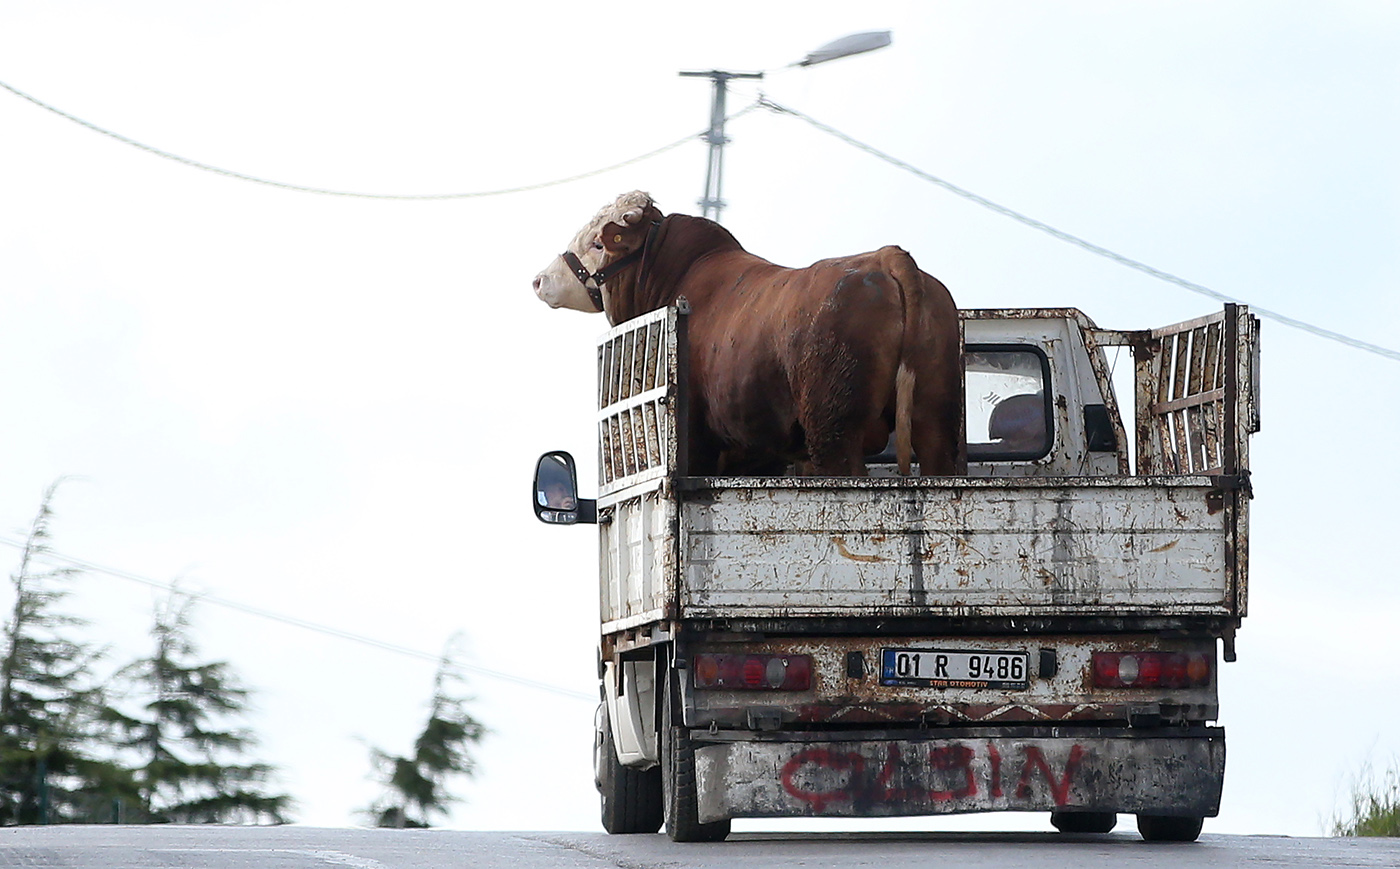 A vehicle transports cattle destined for sacrifice during Eid al-Adha celebrations in Istanbul, Turkey, 11 August 2019. Eid al-Adha is the holiest of the two Muslims holidays celebrated each year, it marks the yearly Muslim pilgrimage (Hajj) to visit Mecca, the holiest place in Islam. Muslims slaughter a sacrificial animal and split the meat into three parts, one for the family, one for friends and relatives, and one for the poor and needy.